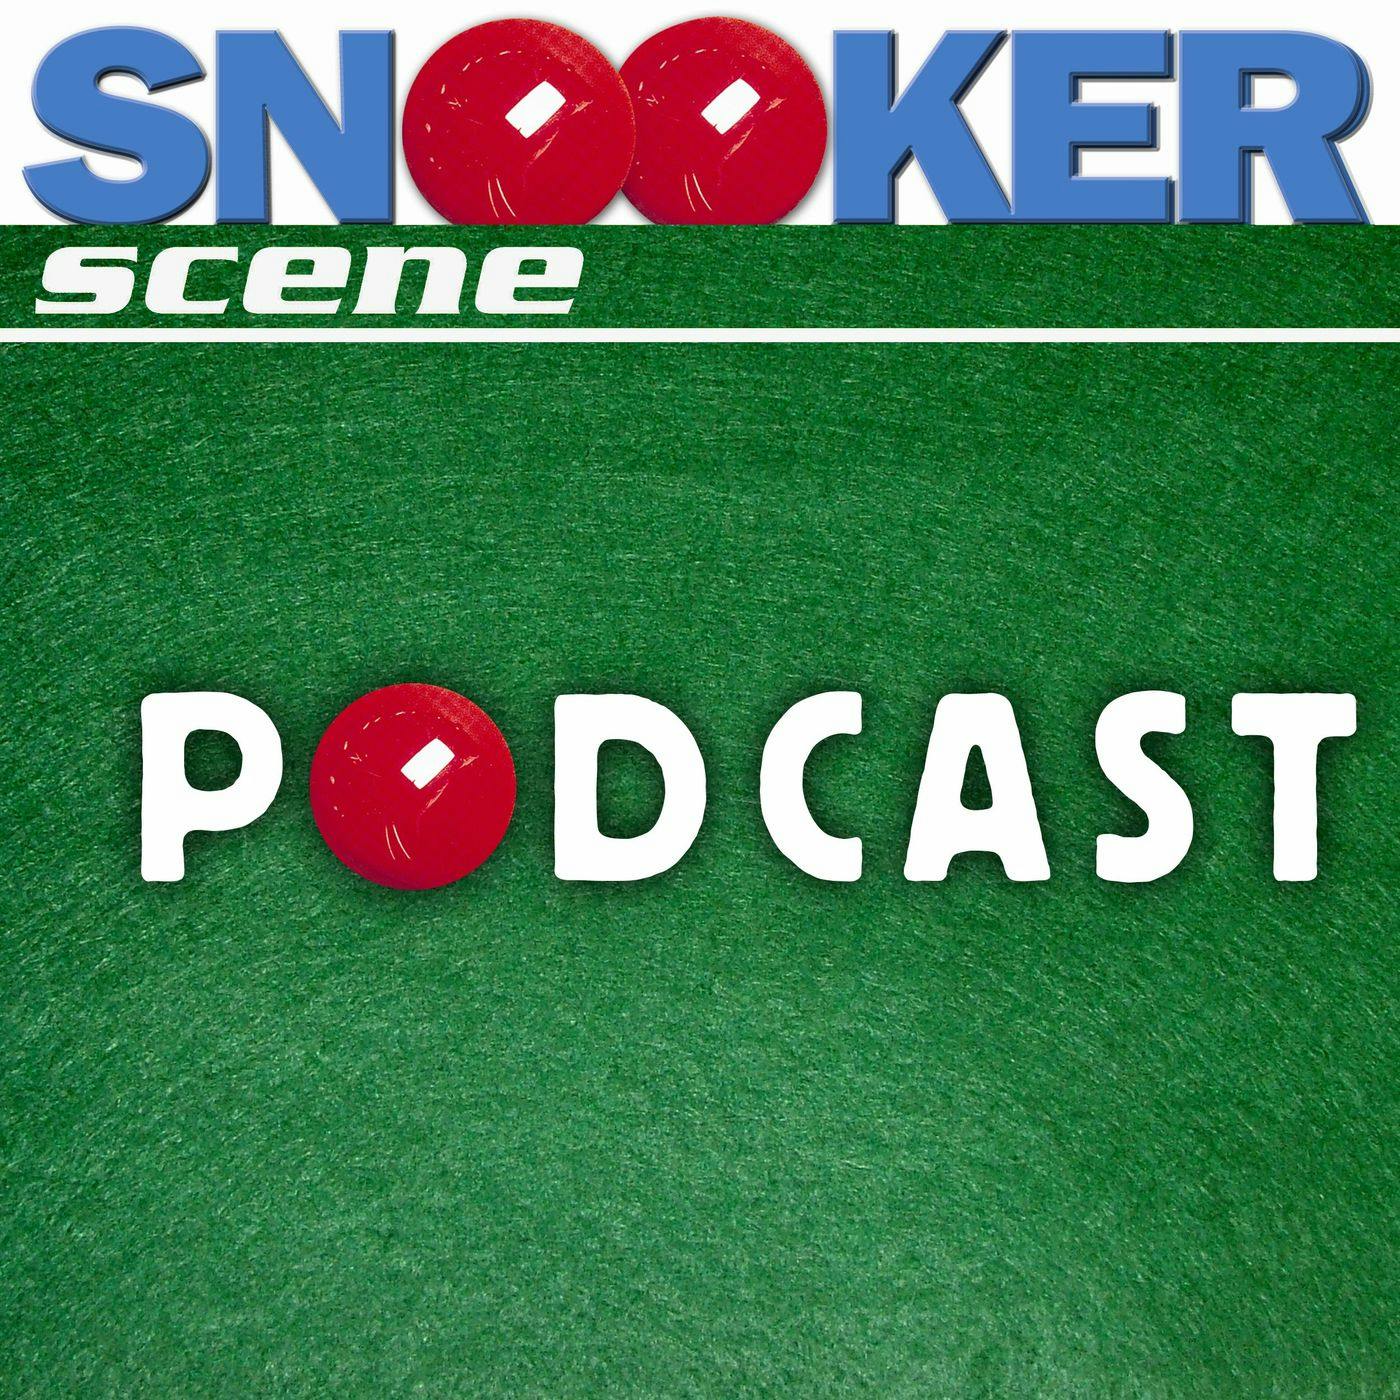 Snooker Scene Podcast episode 73 - Simply the Best